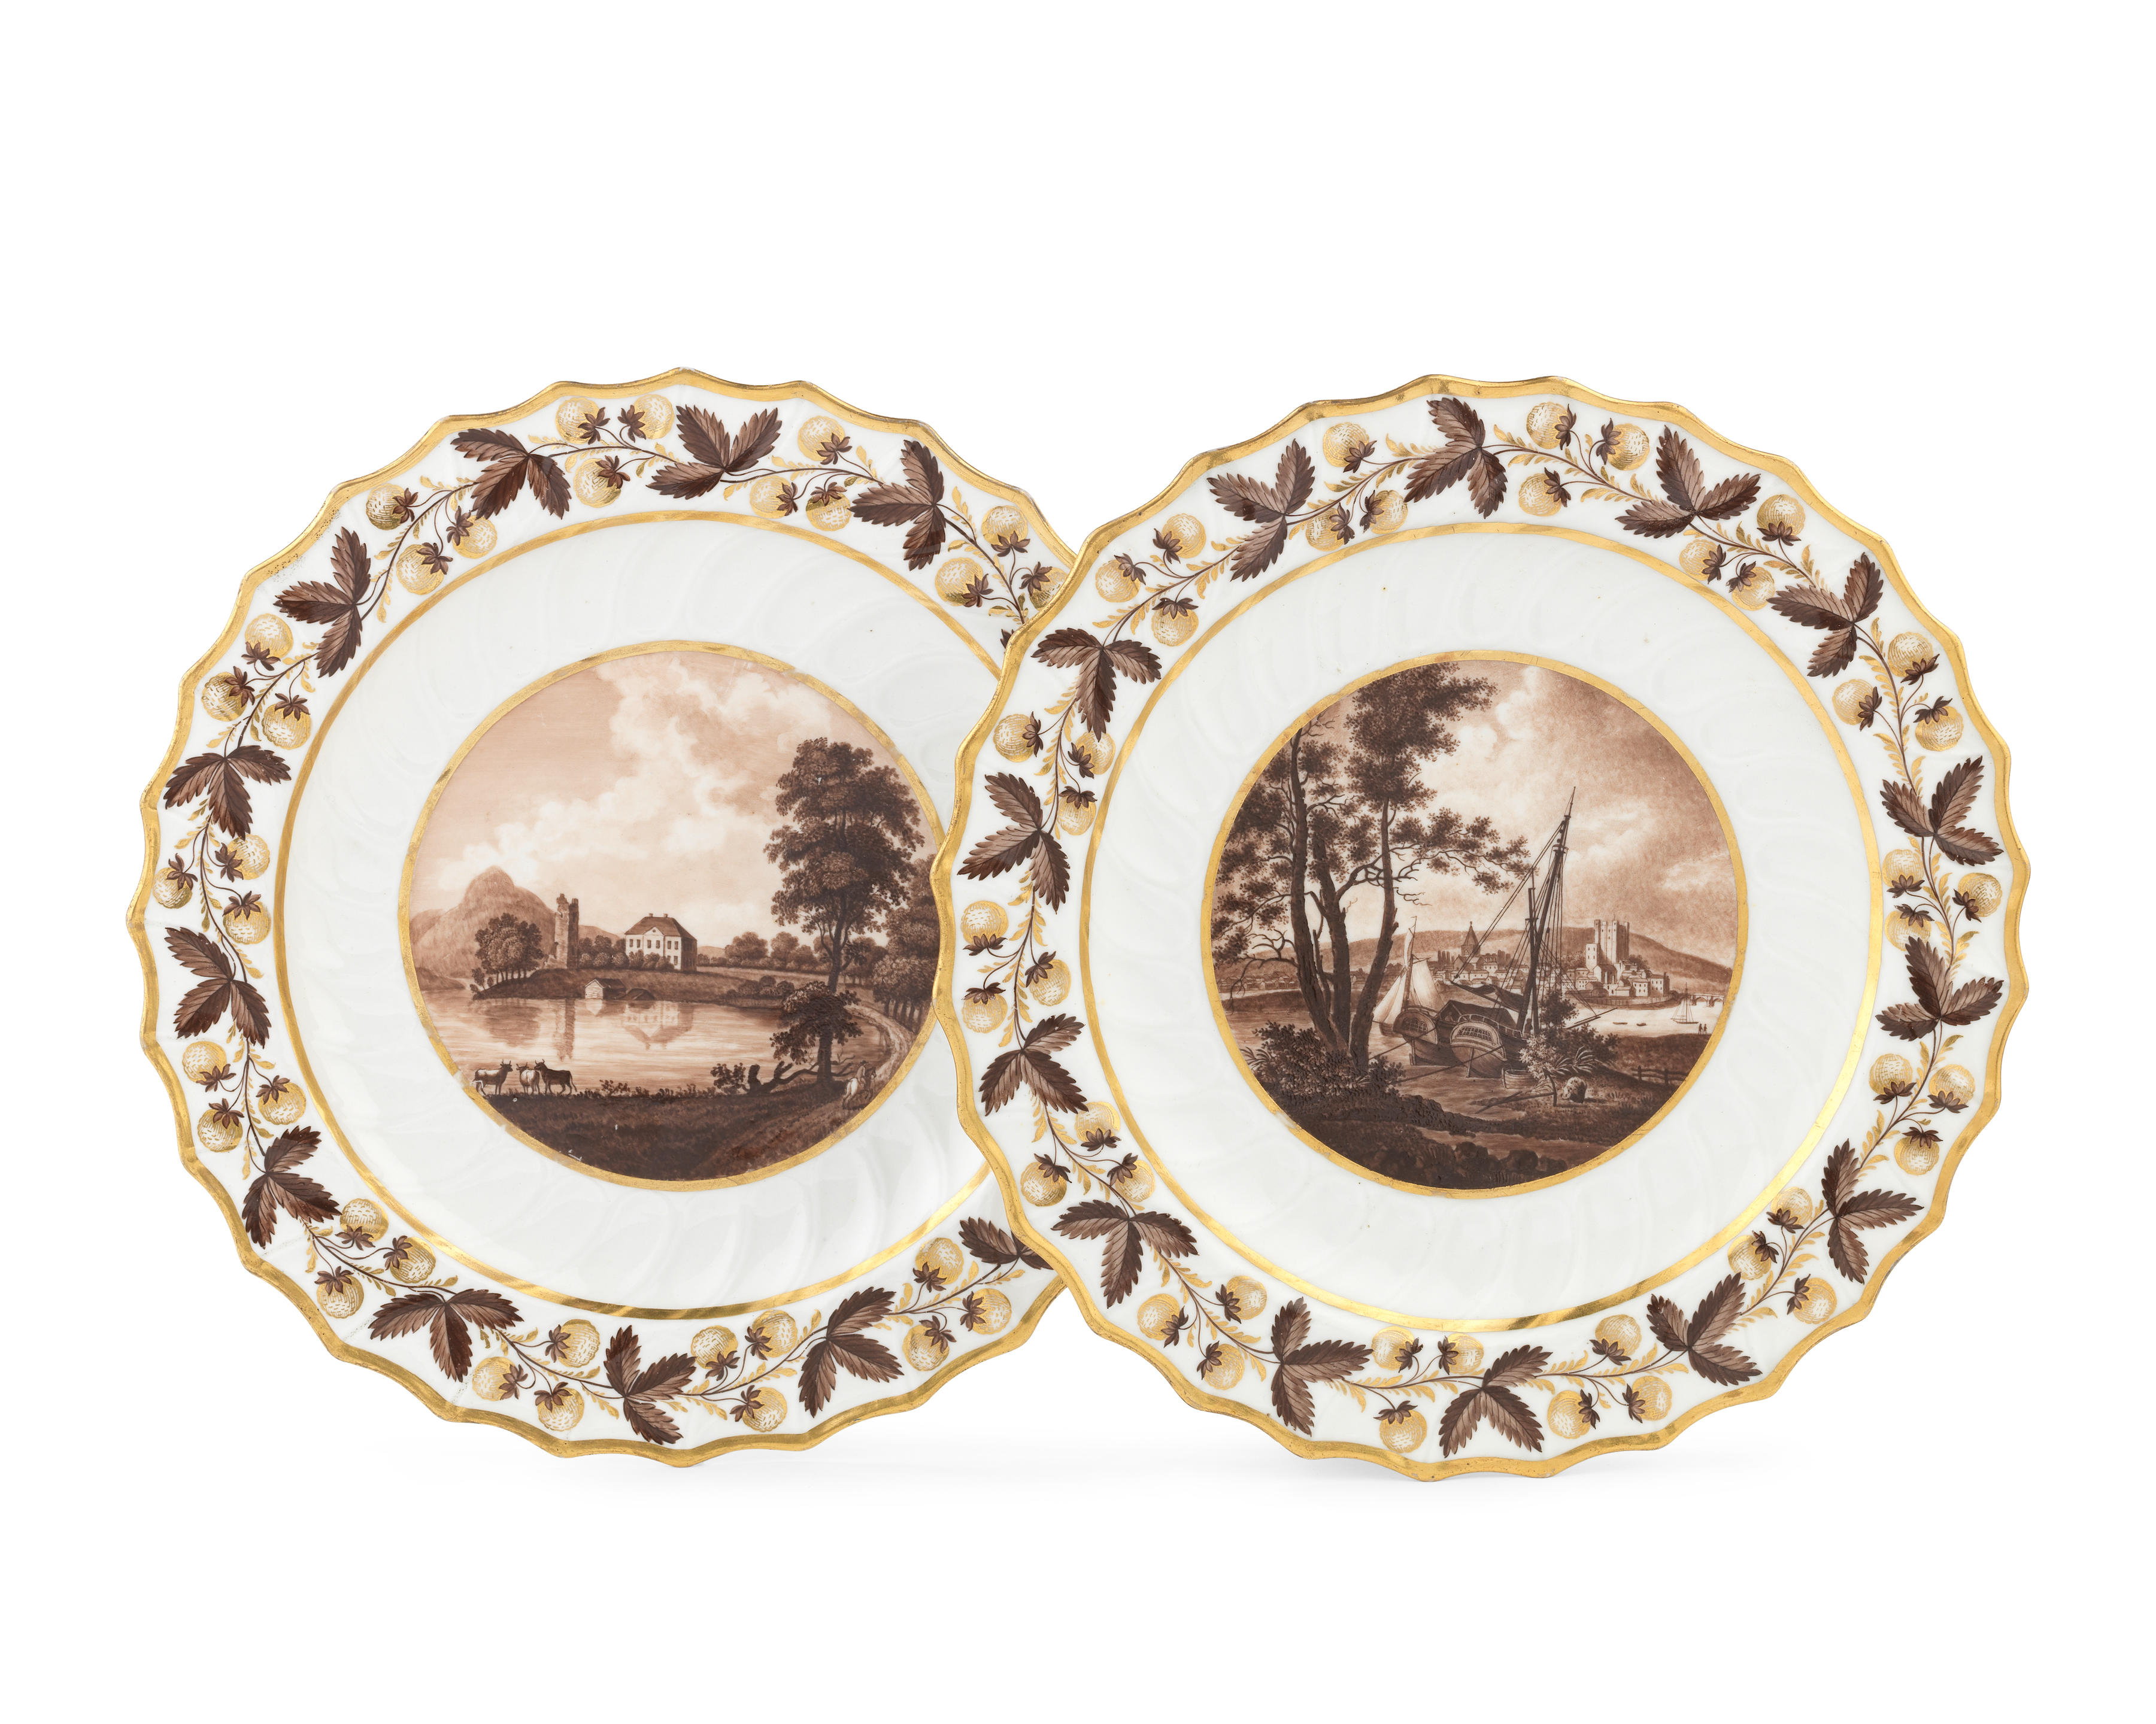 A pair of Flight and Barr plates, circa 1800